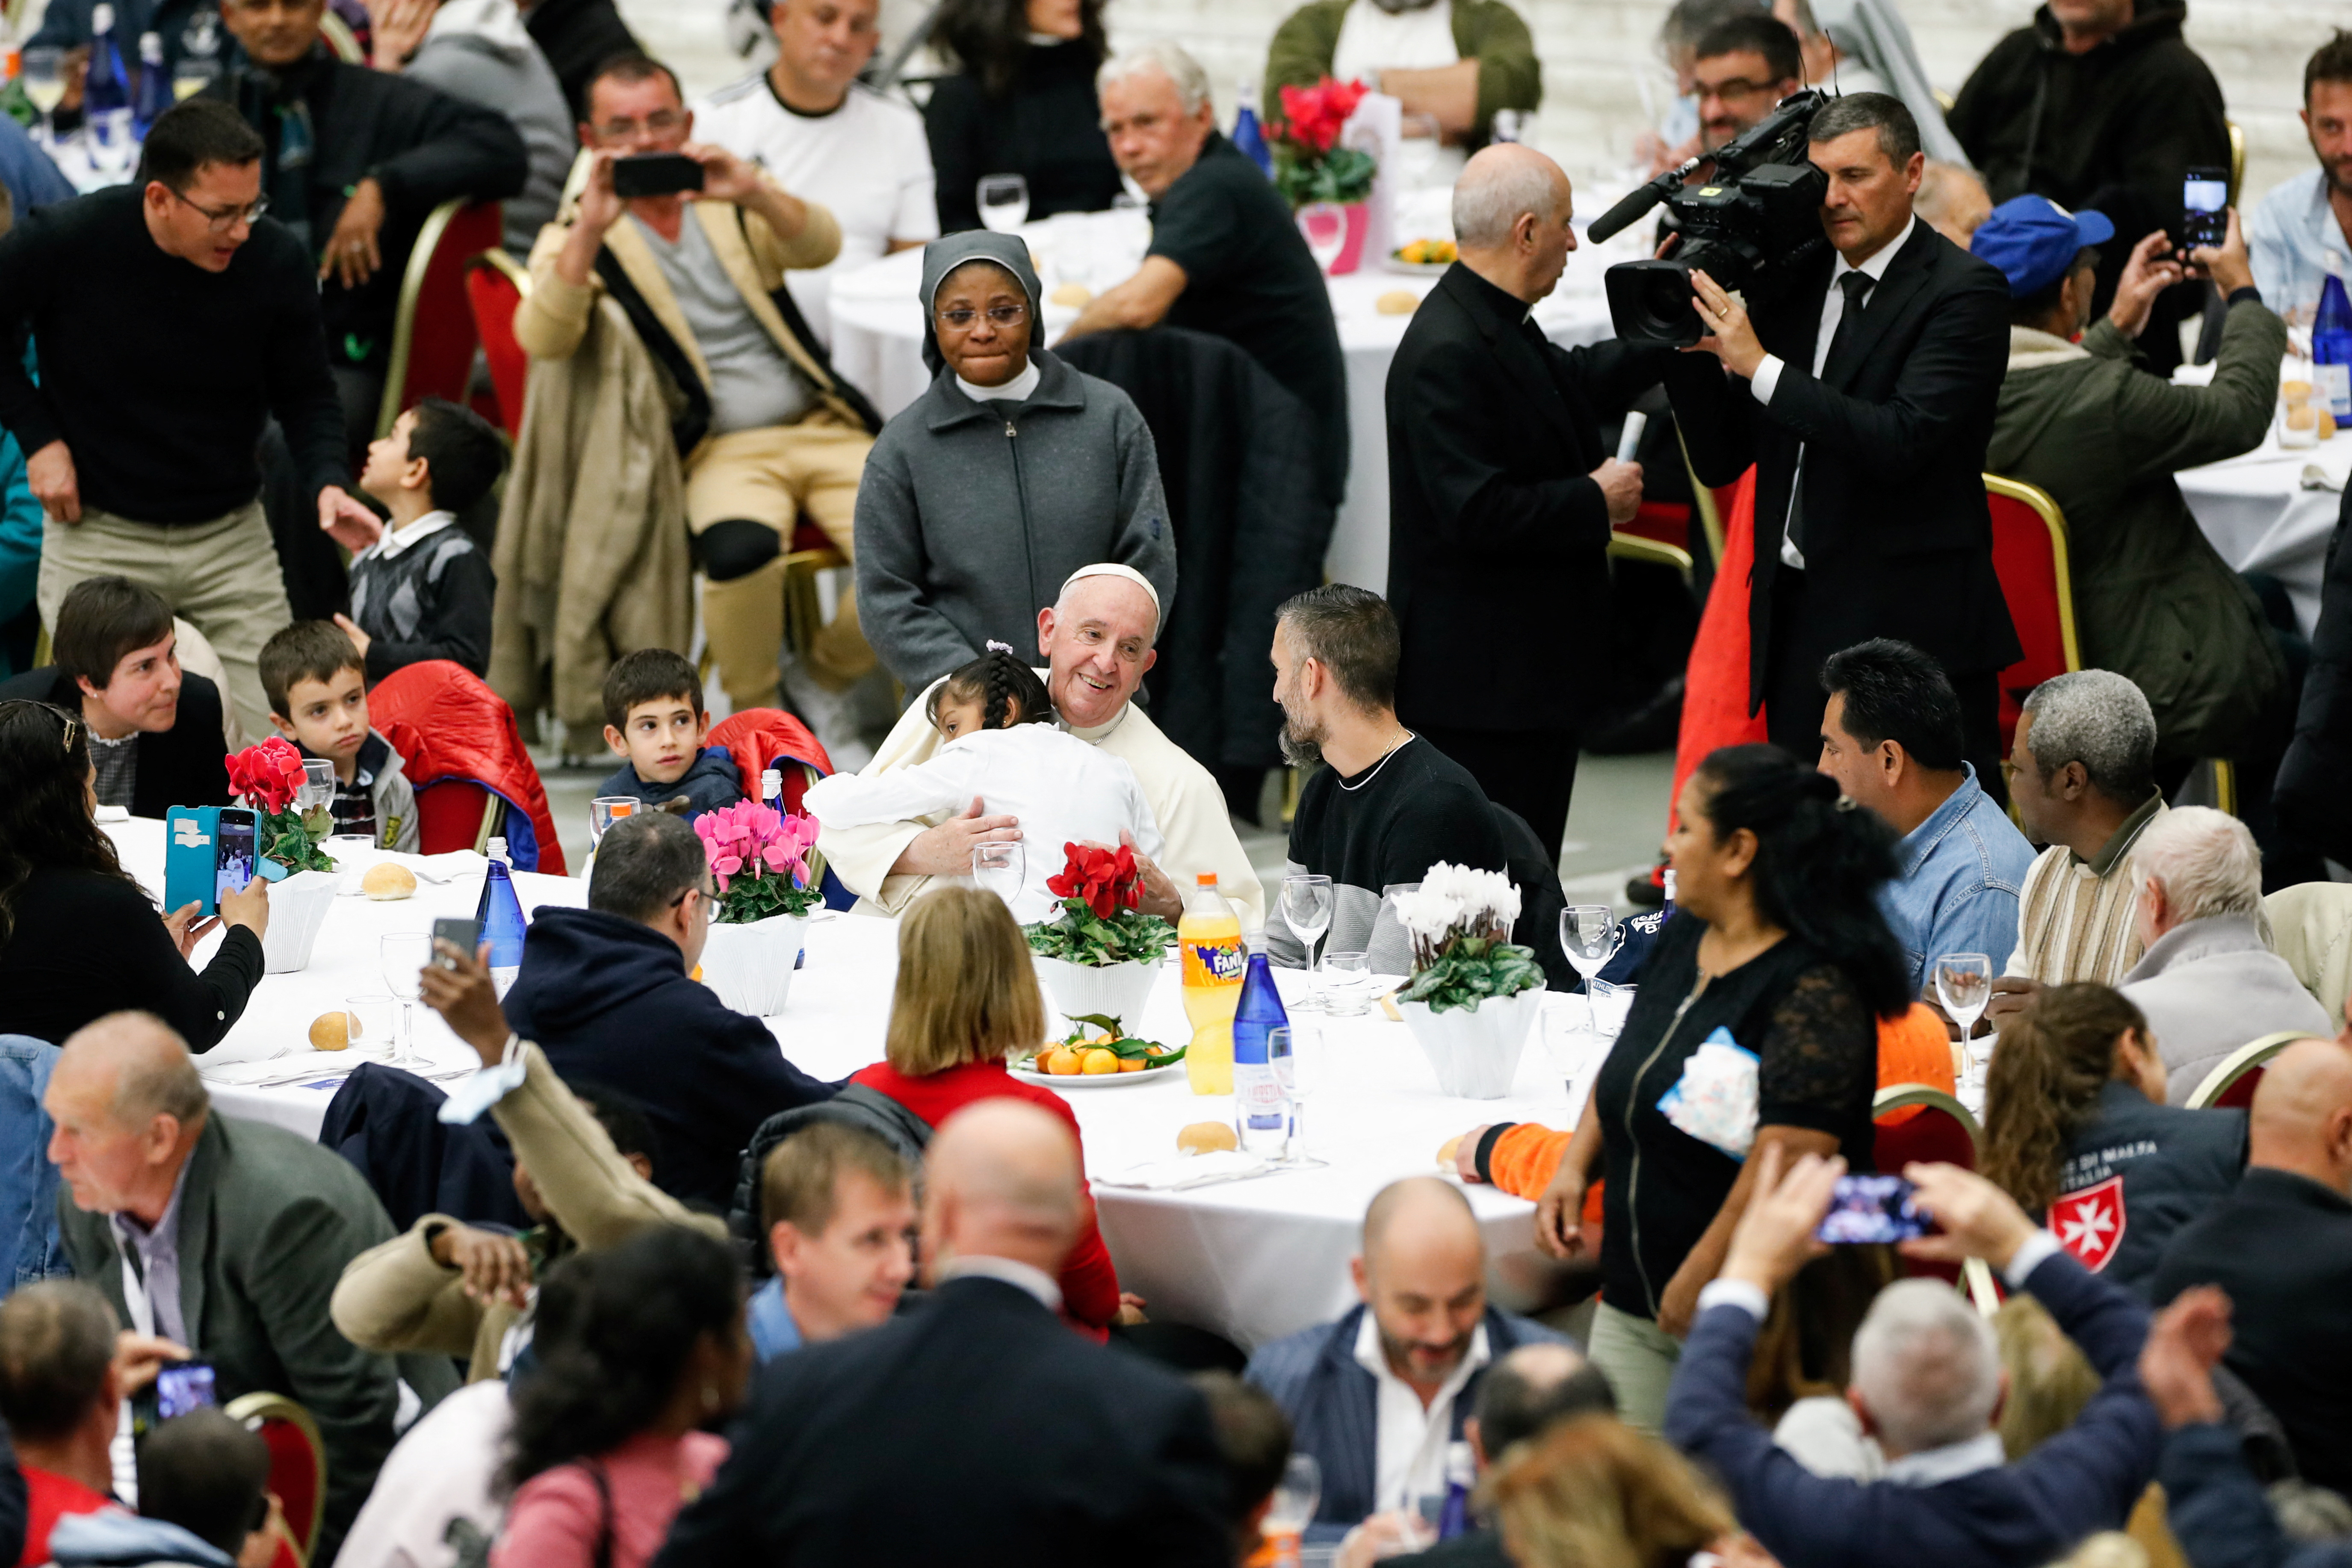 Pope Francis participates in a lunch on World Day of Poor, at the Vatican